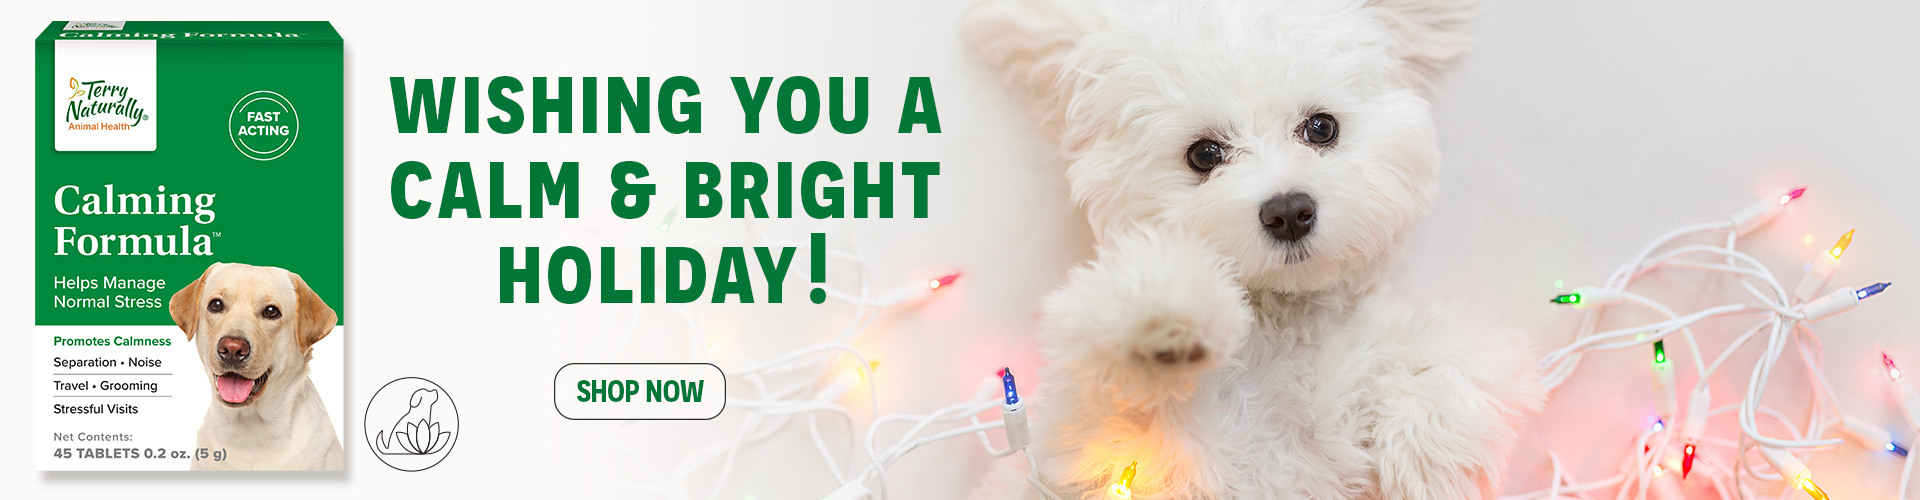 Wishing You a Calm & Bright Holiday! • SHOP NOW